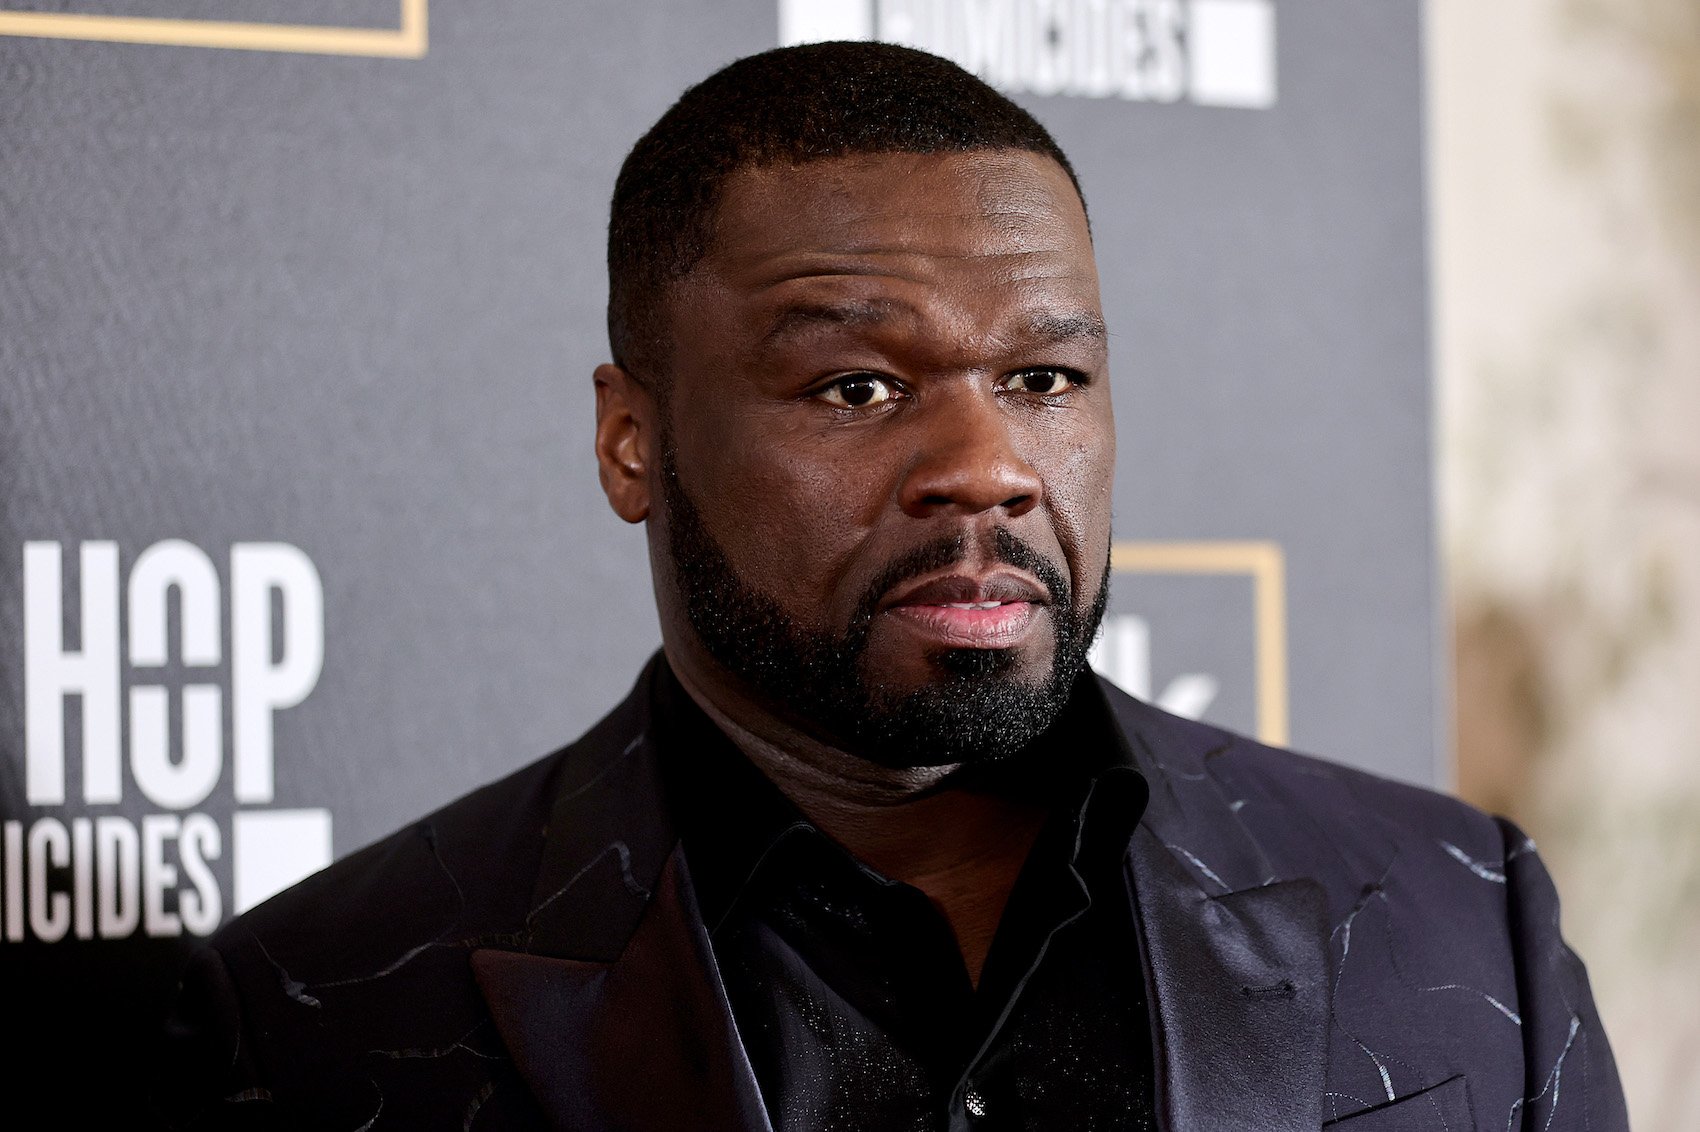 Curtis "50 Cent" Jackson, who shared his thoughts on Jay-Z and Eminem, on the red carpet